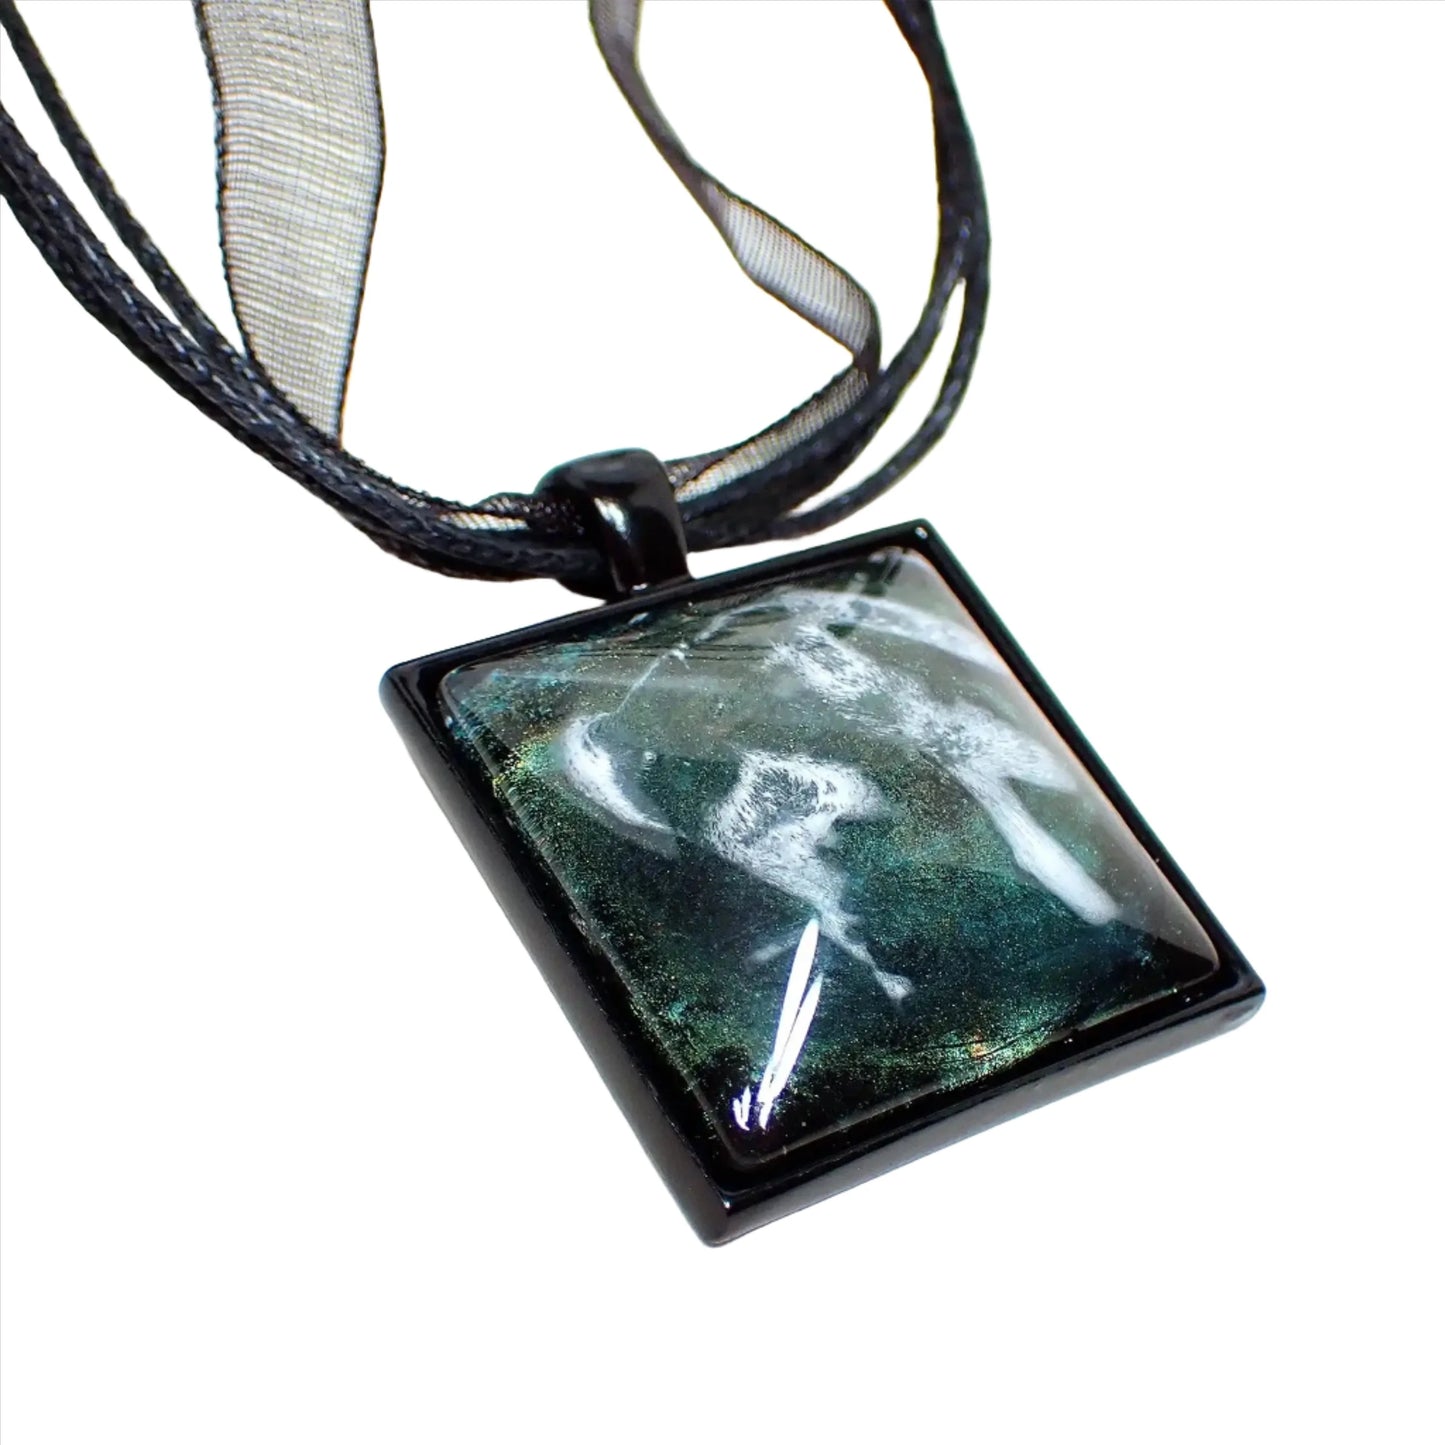 Enlarged view of the square handmade frost resin pendant. The necklace part has three strands of black faux leather cord and a strand of black organza ribbon. There is a black coated square pendant at the bottom with a domed resin cab. The resin has iridescent shades of green and yellow and an abstract frost design.